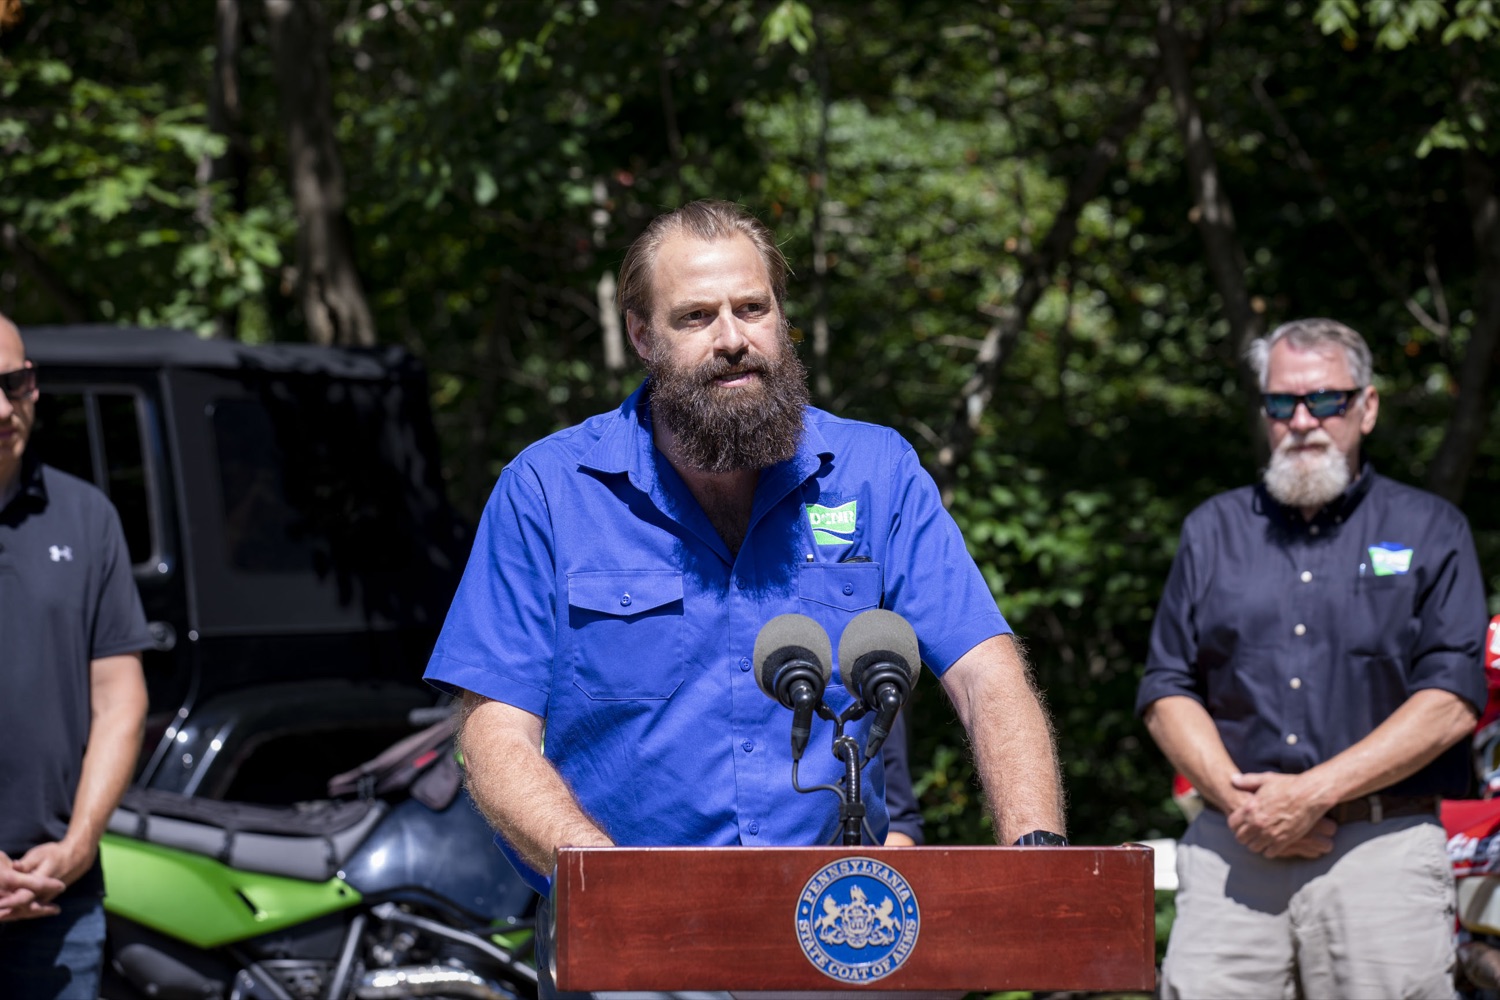 Pennsylvania Director of Outdoor Recreation Nathan Reigner discusses the acquisition of a 5,600-acre tract of land that will be developed into a new motorized recreation area, in McAdoo, PA on August 12, 2022.<br><a href="https://filesource.amperwave.net/commonwealthofpa/photo/22090_dcnr_RecreationArea_19.jpg" target="_blank">⇣ Download Photo</a>